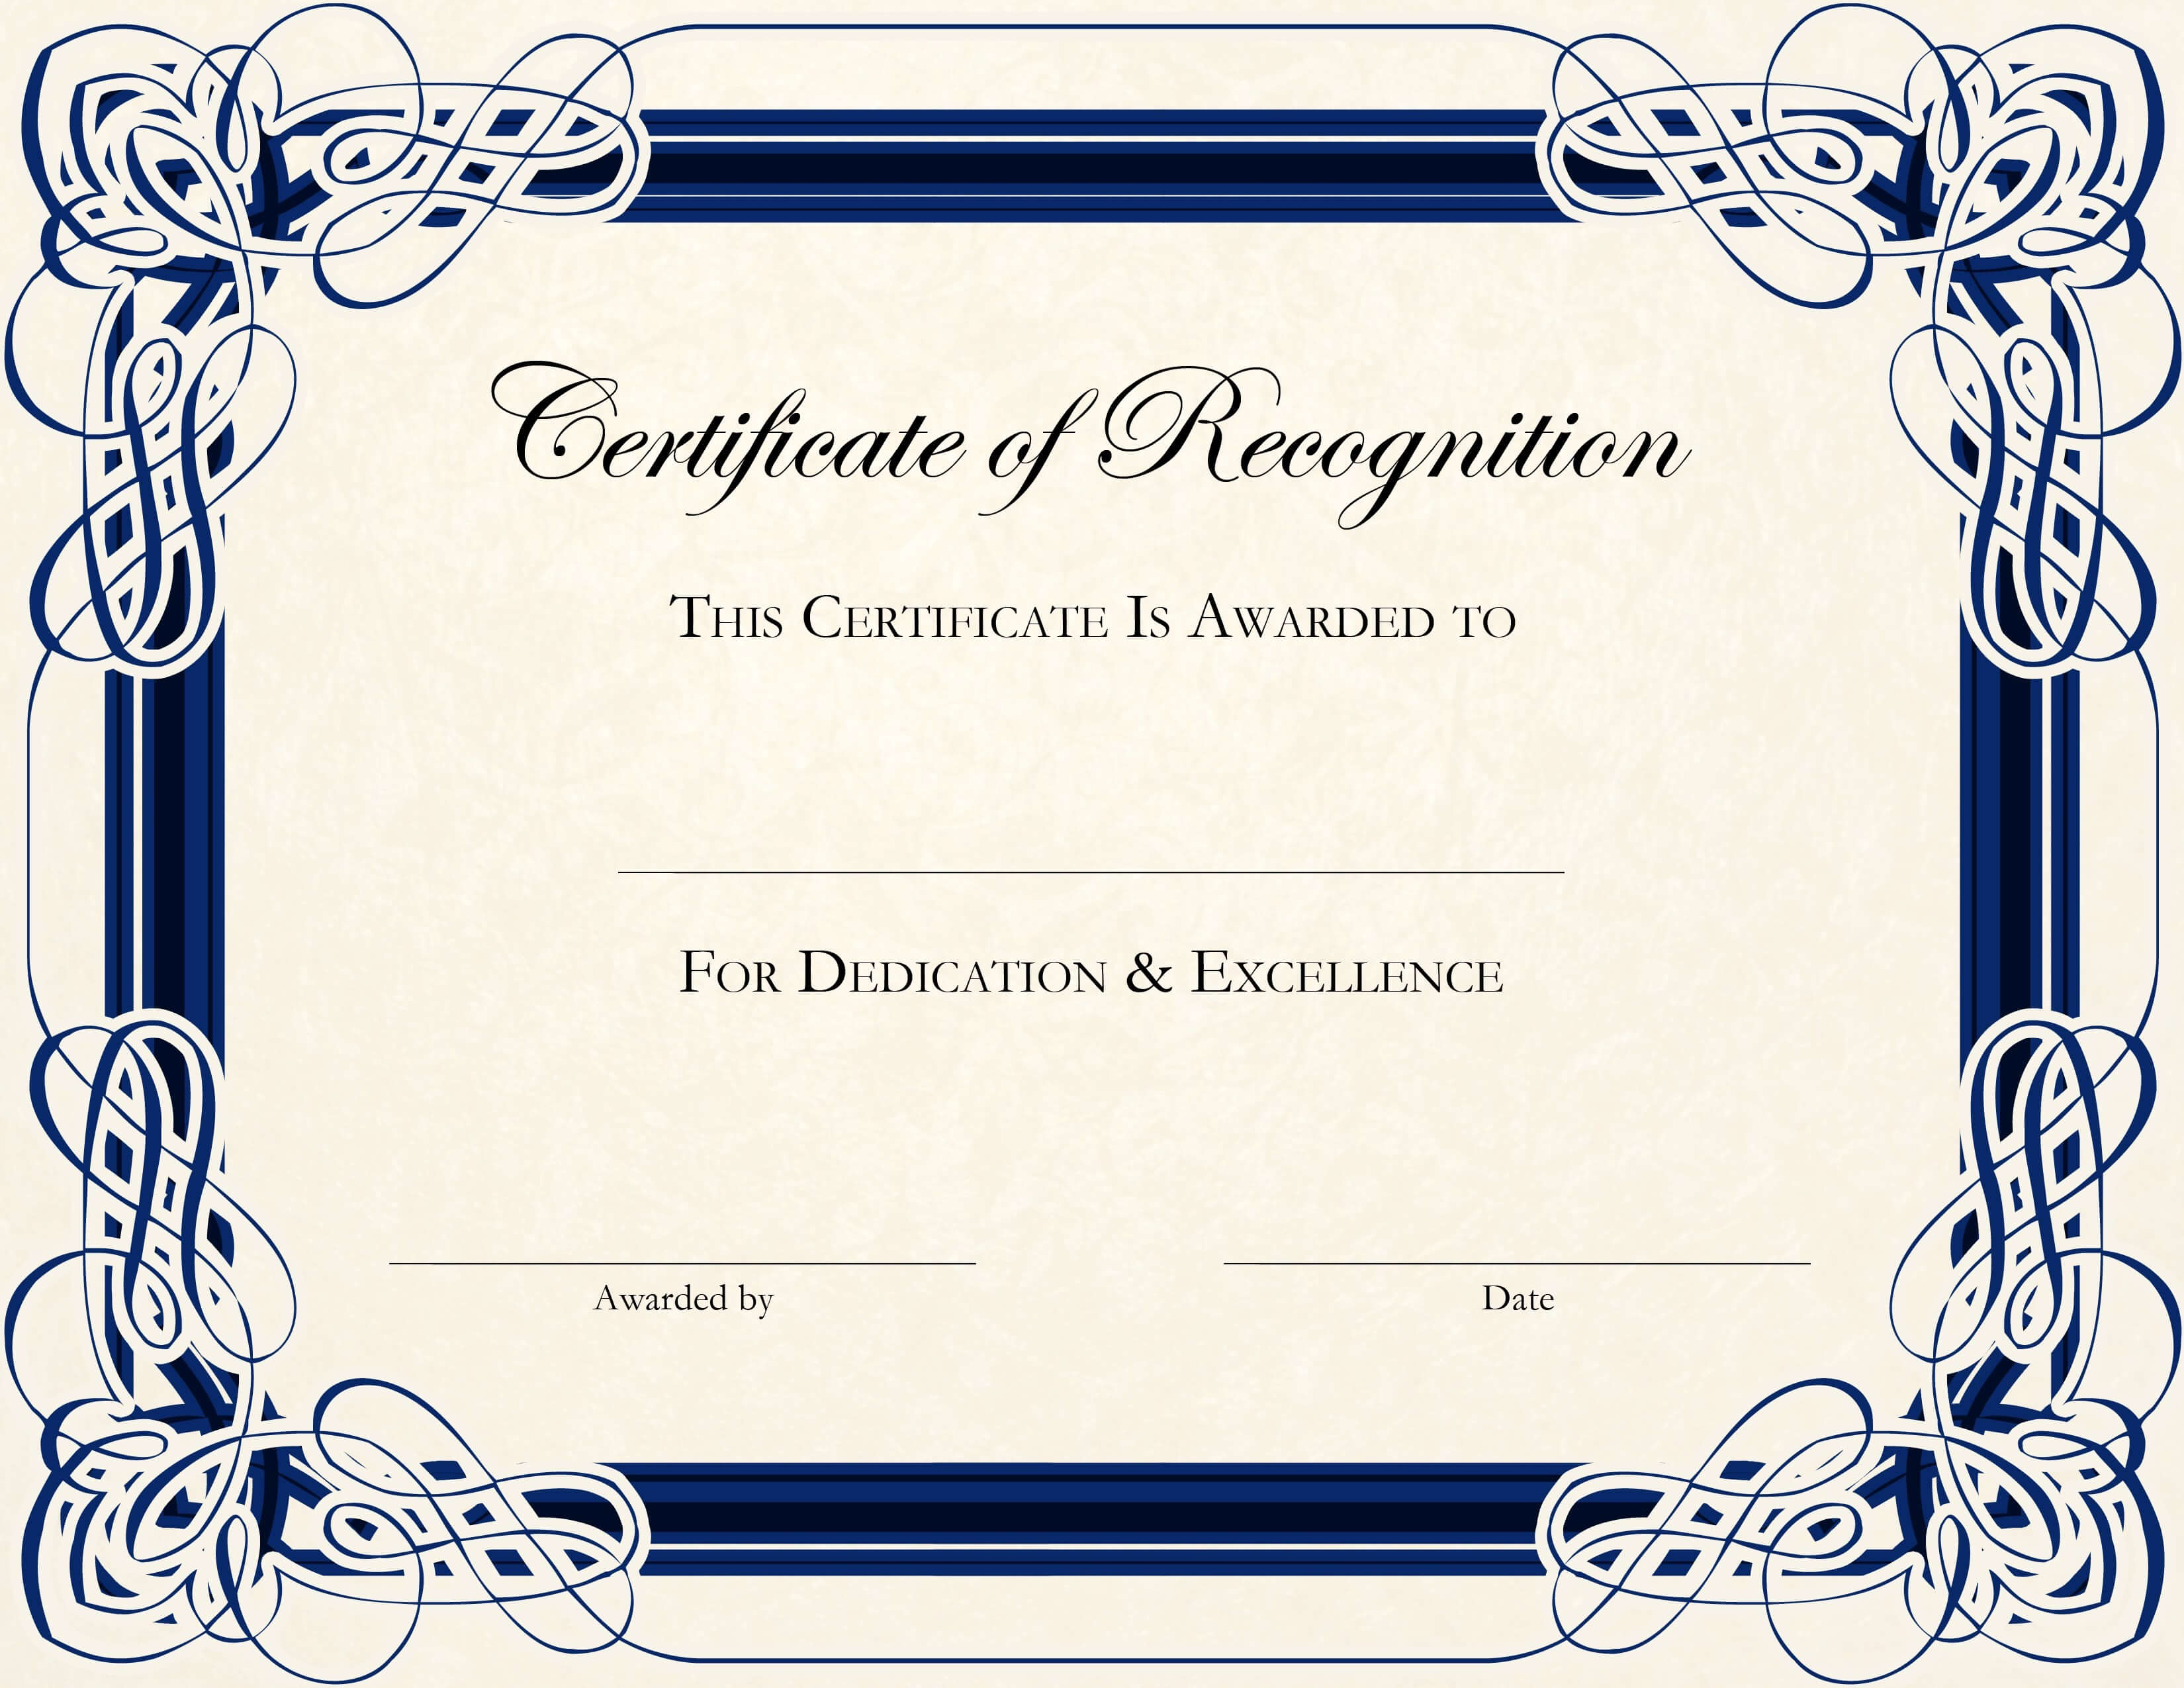 Gold Certificate Template Word | Certificatetemplateword Regarding Free Funny Certificate Templates For Word